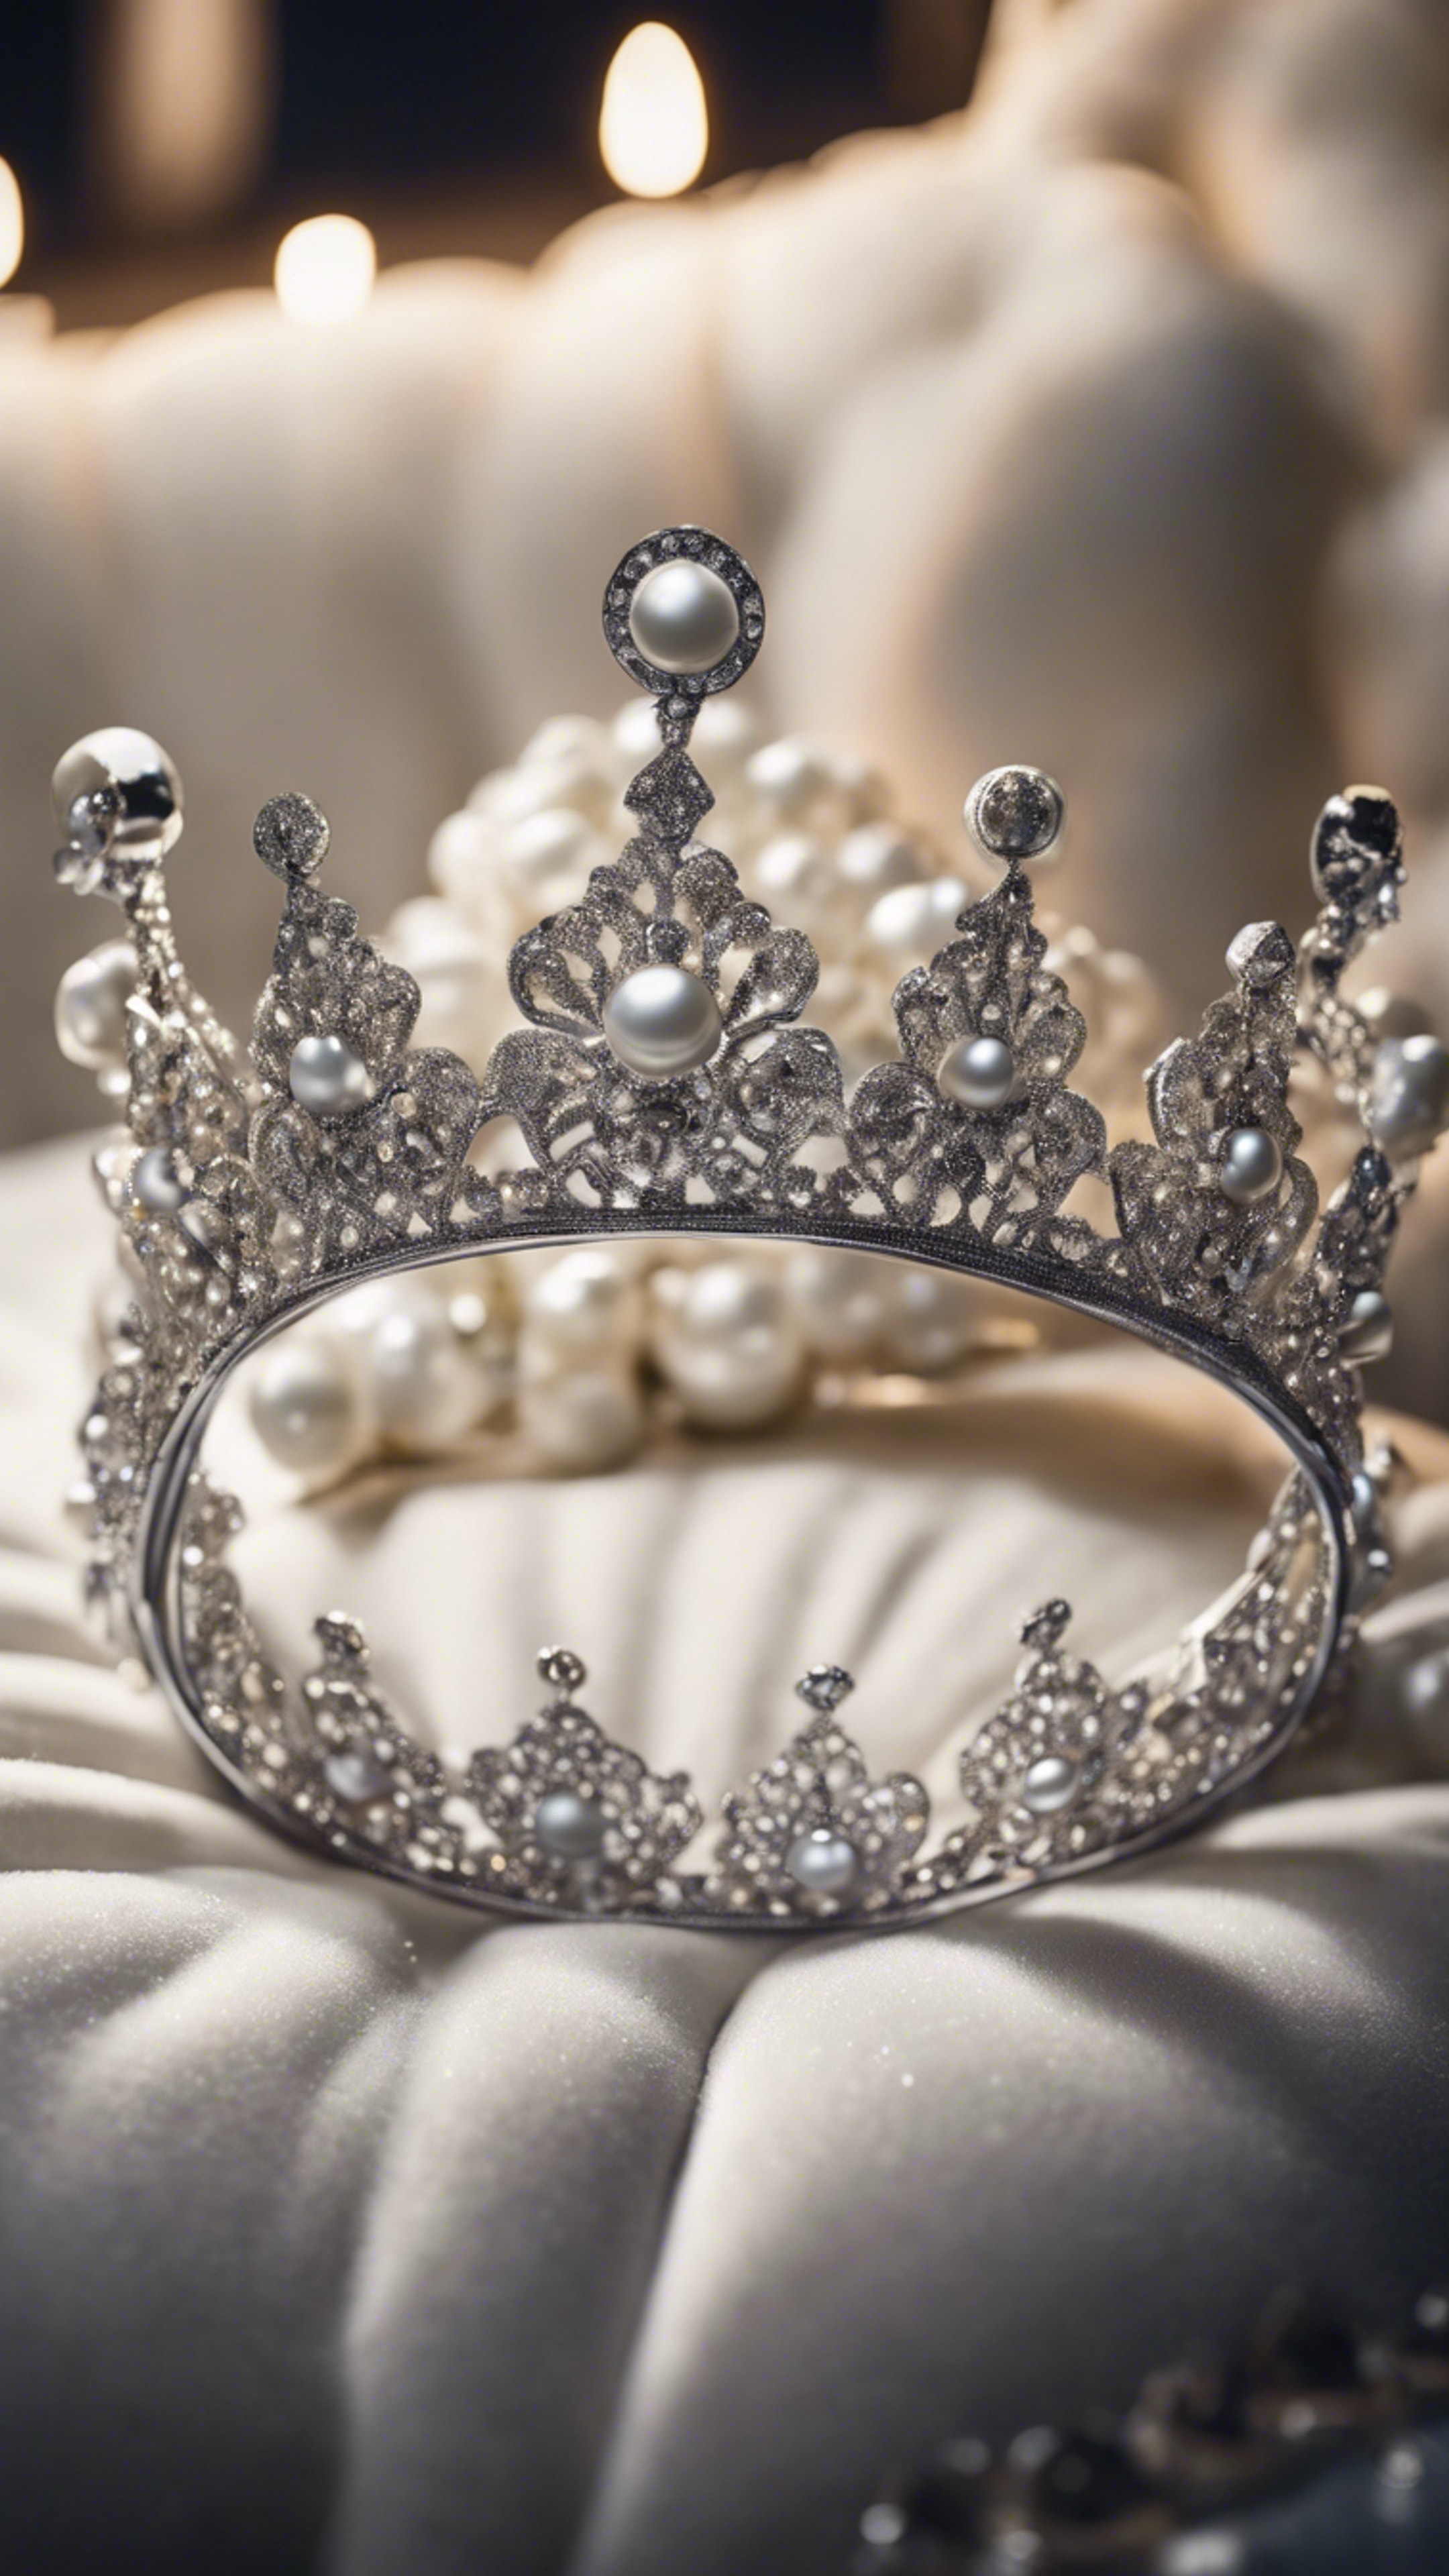 A classic silver crown embellished with pearls and diamonds lying on a white velvet cushion at night. کاغذ دیواری[f90278dd6b1c4e9ca8cc]